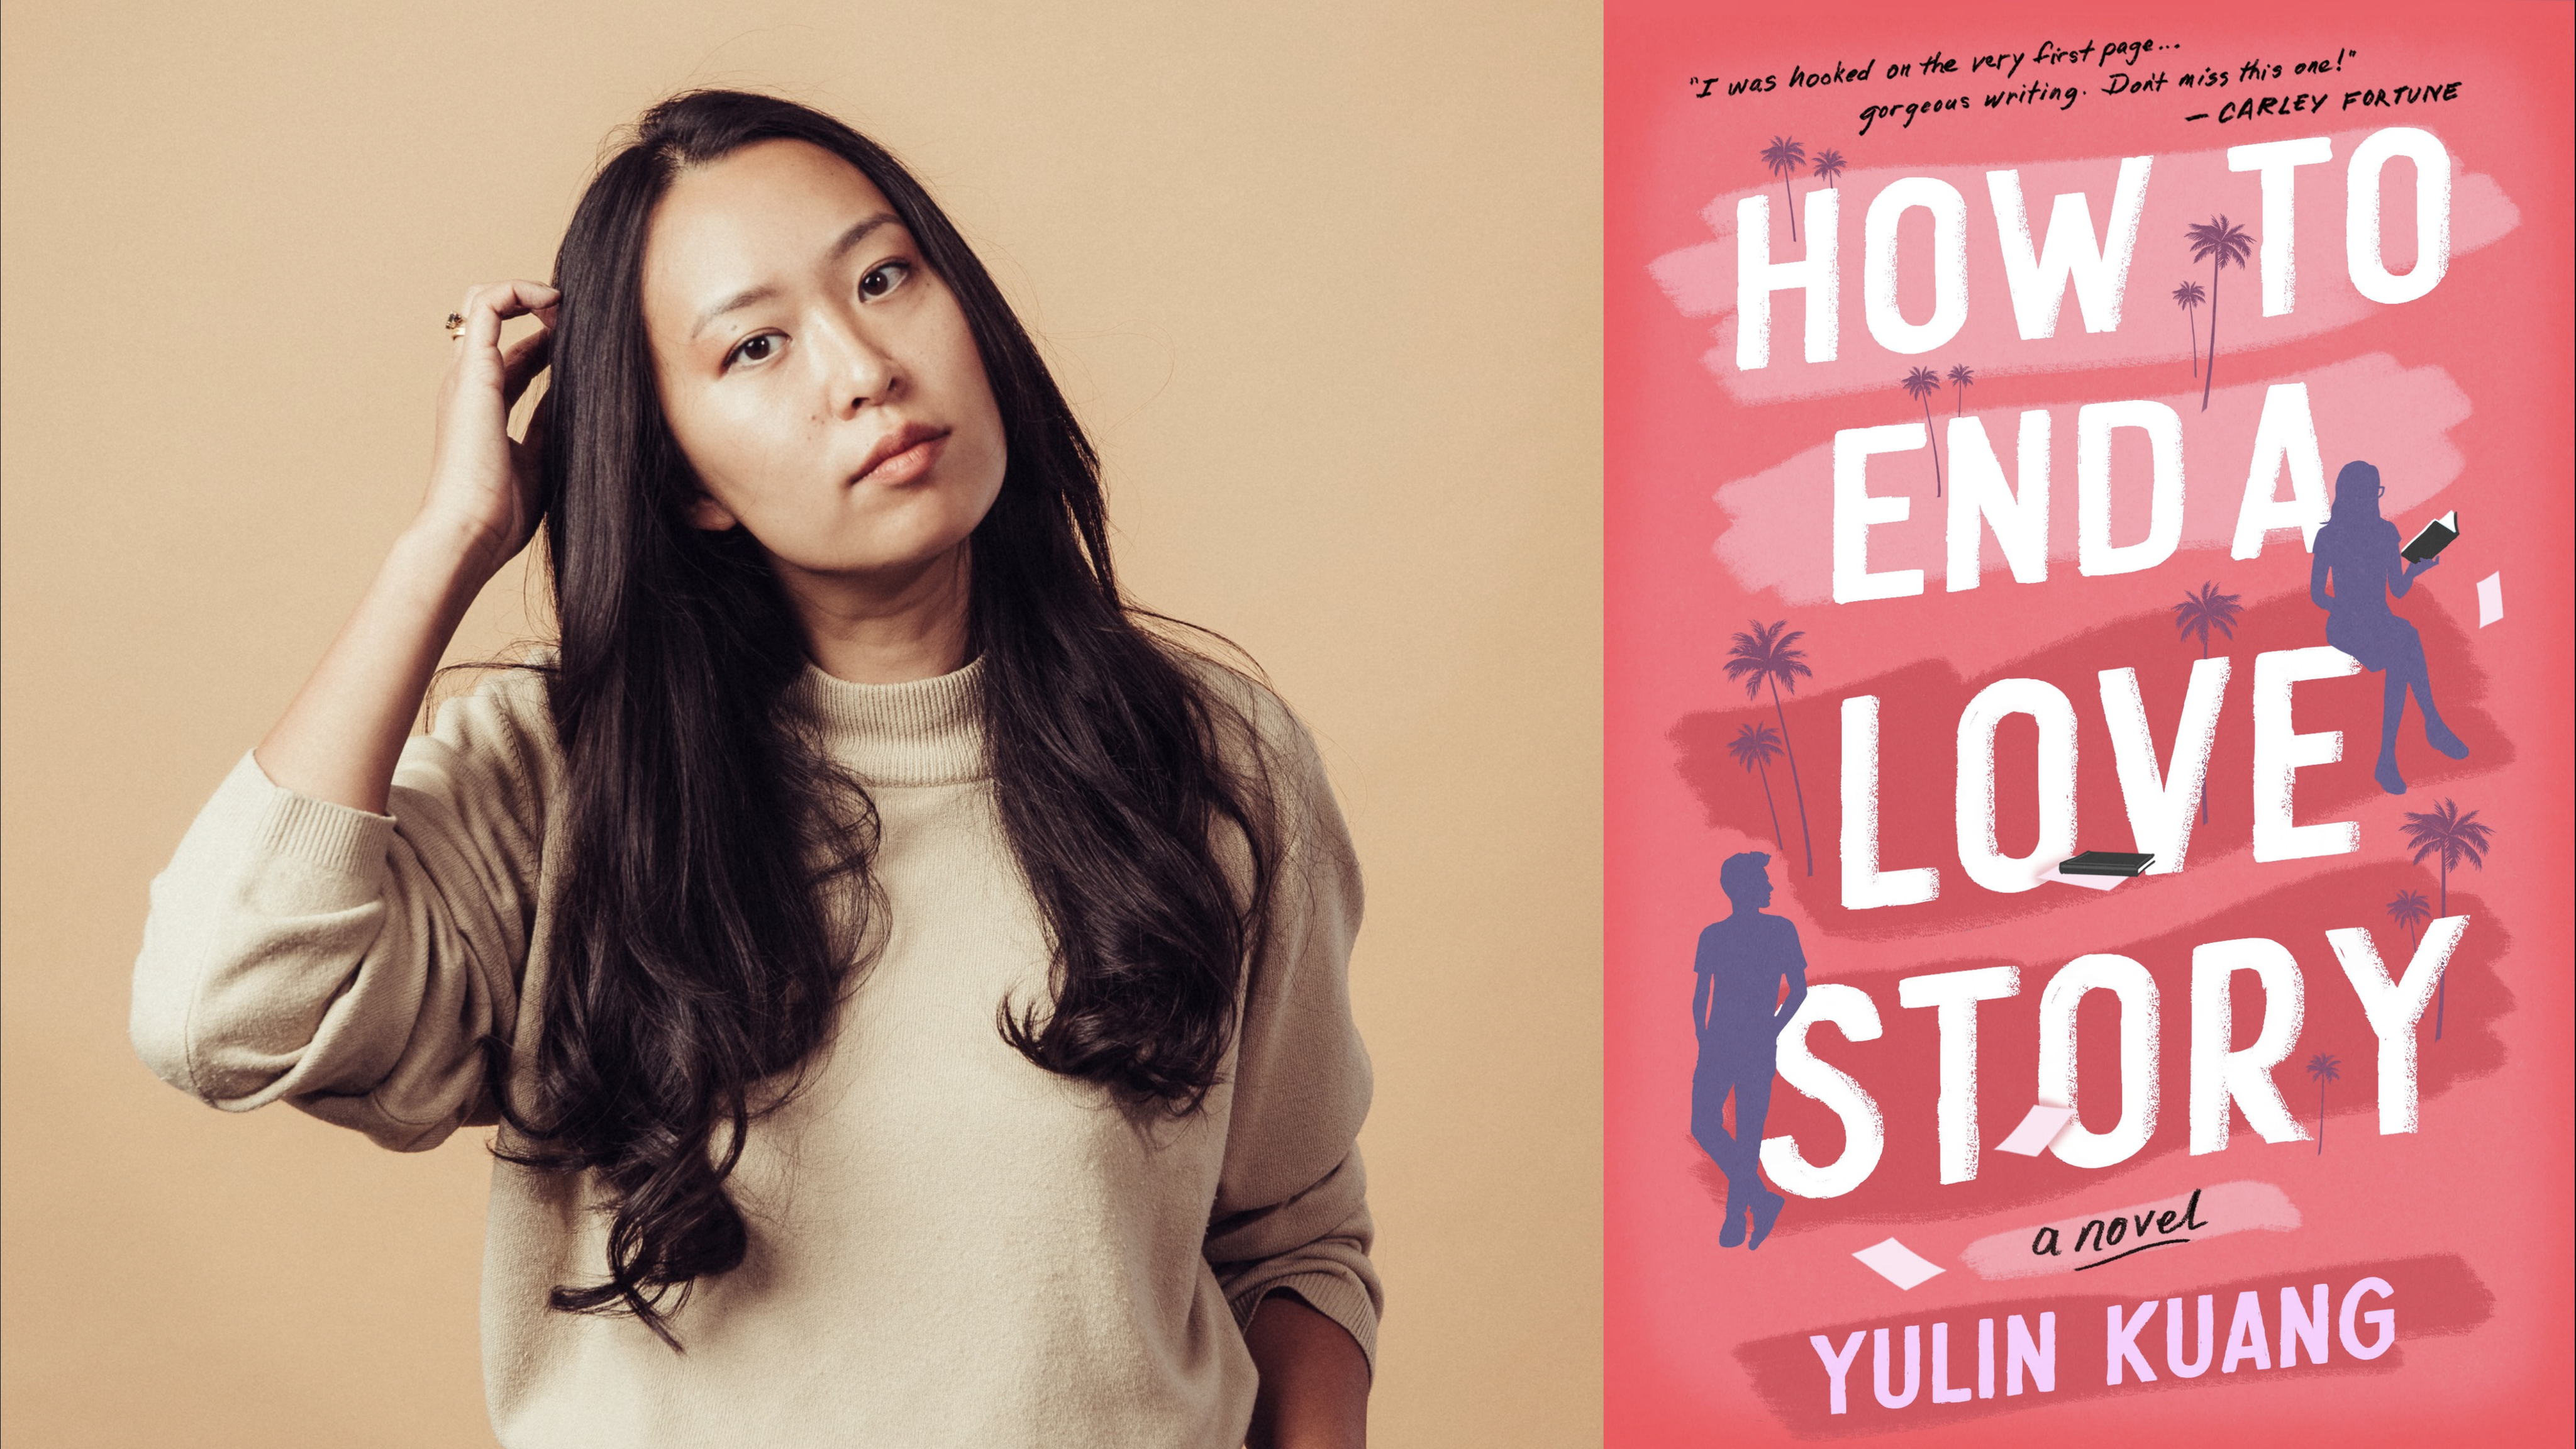 Author Yulin Kuang and the cover of her book 